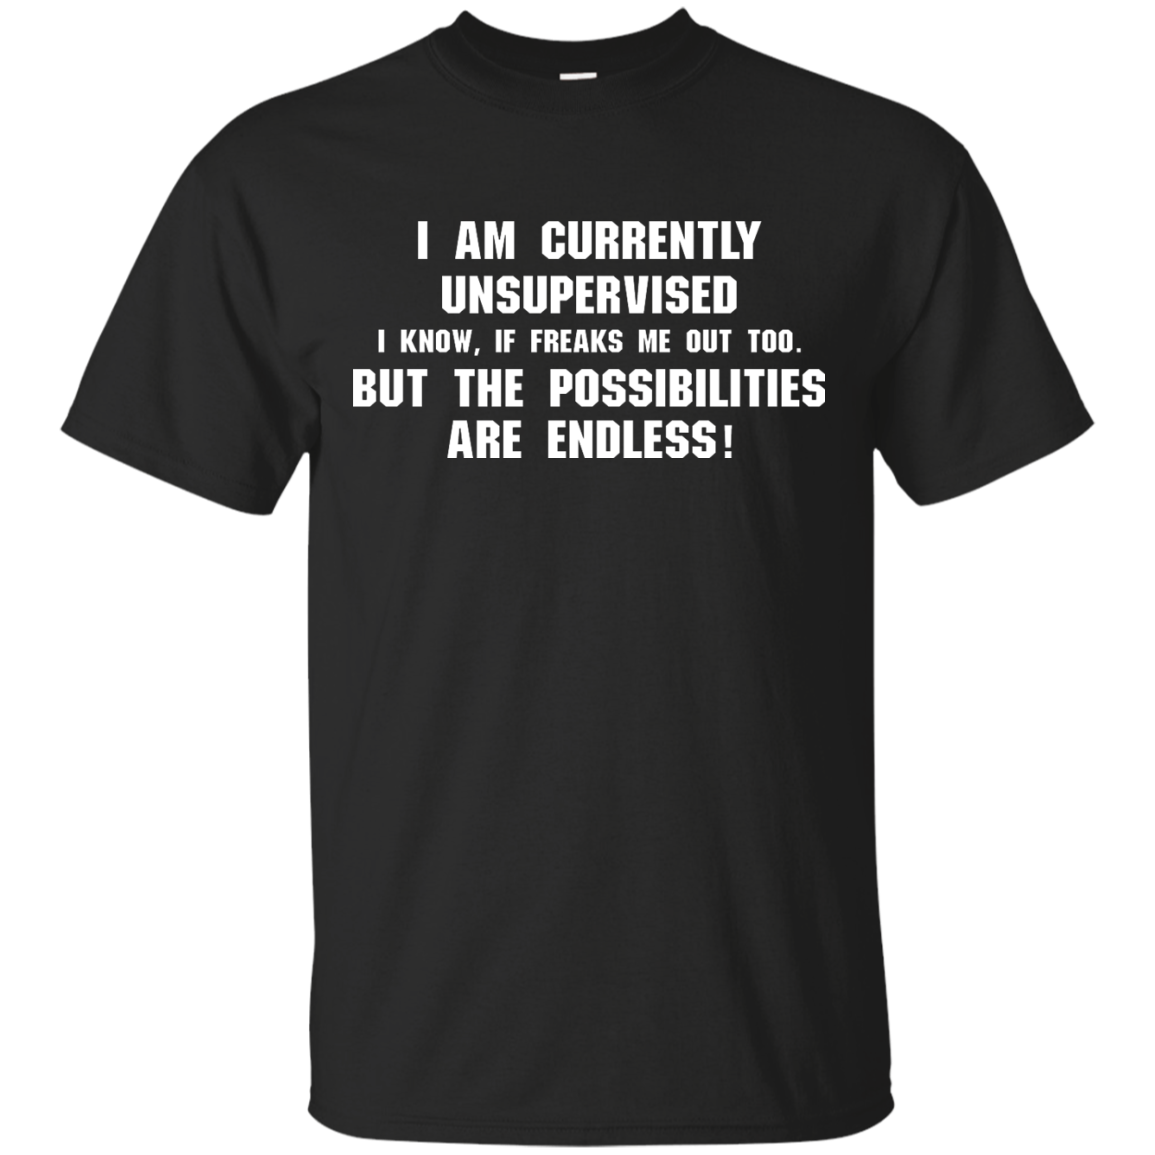 I am currently unsupervised, I know it freaks me out too shirt, tank ...